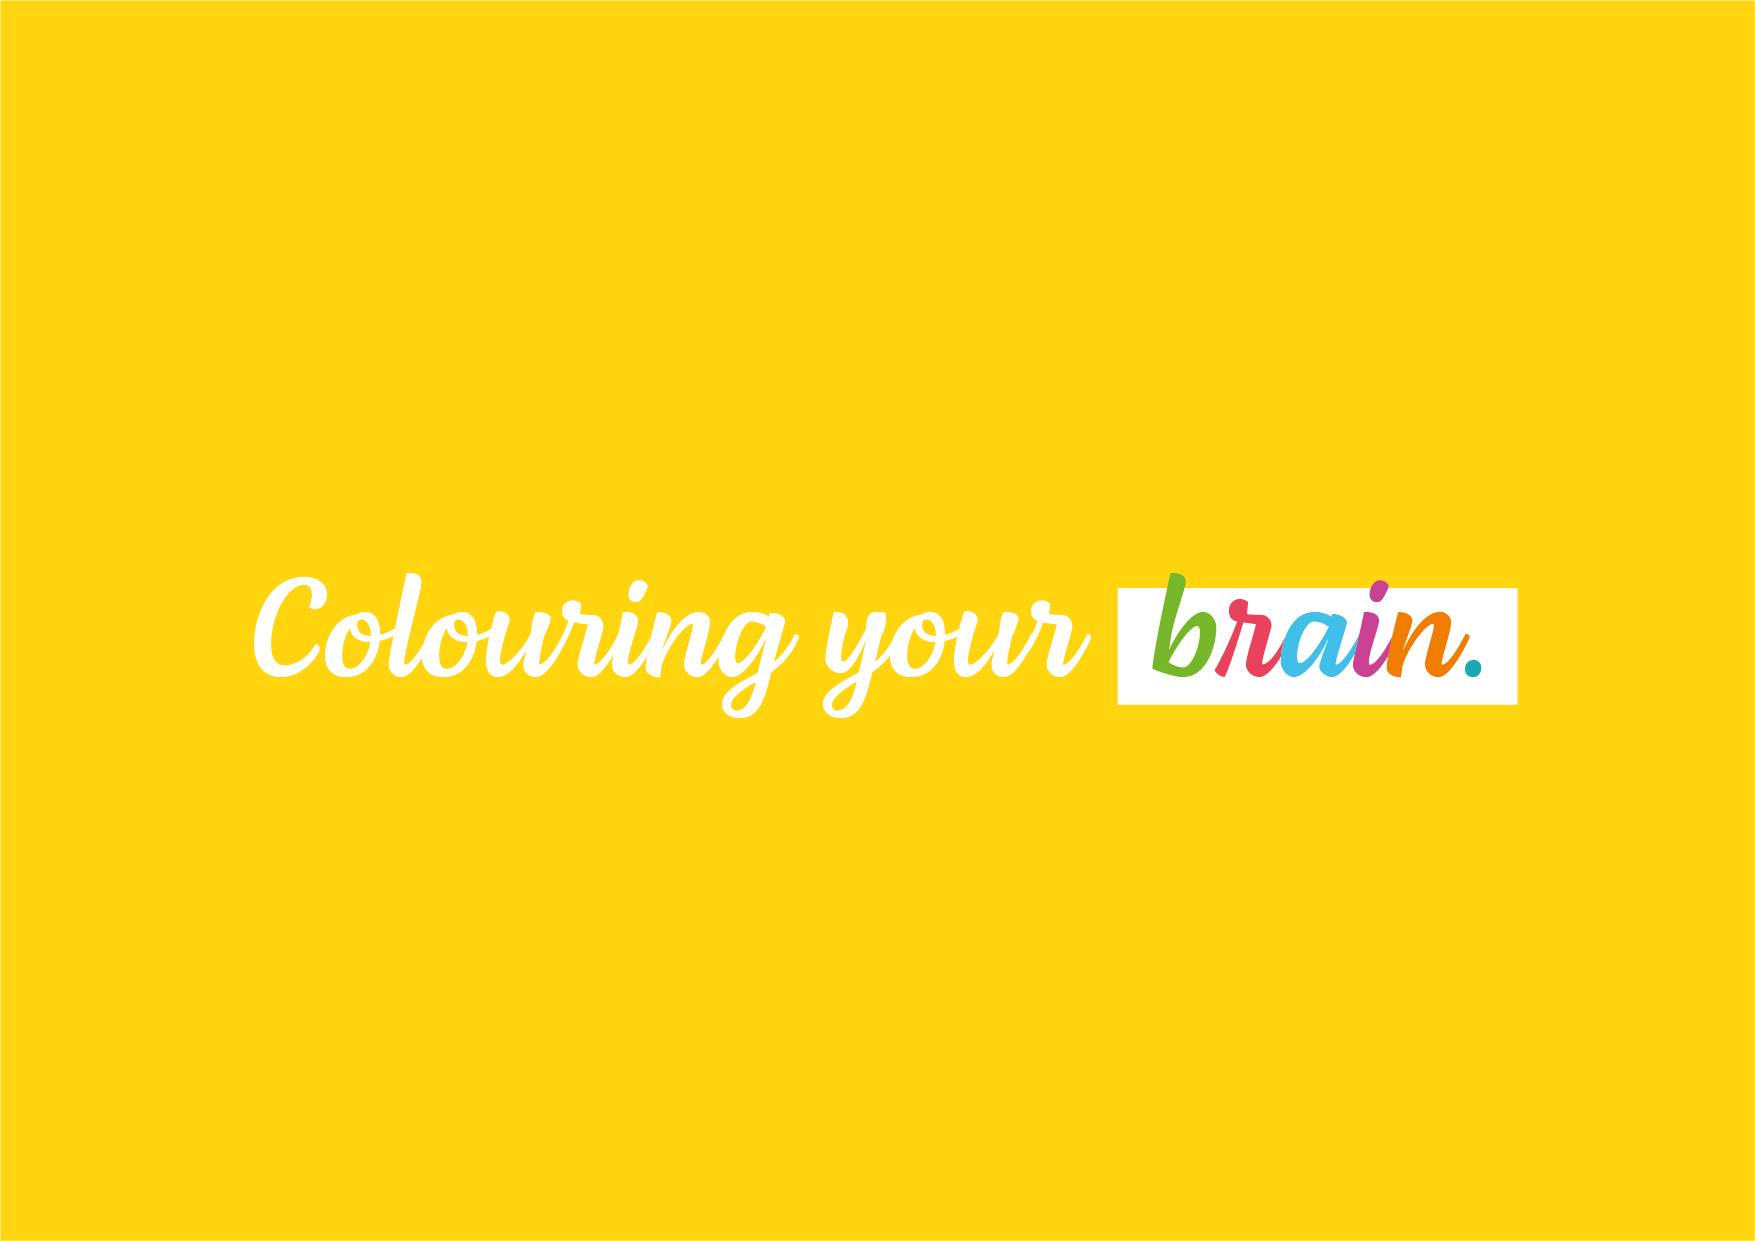 abc Education branding for slogan colouring your brain